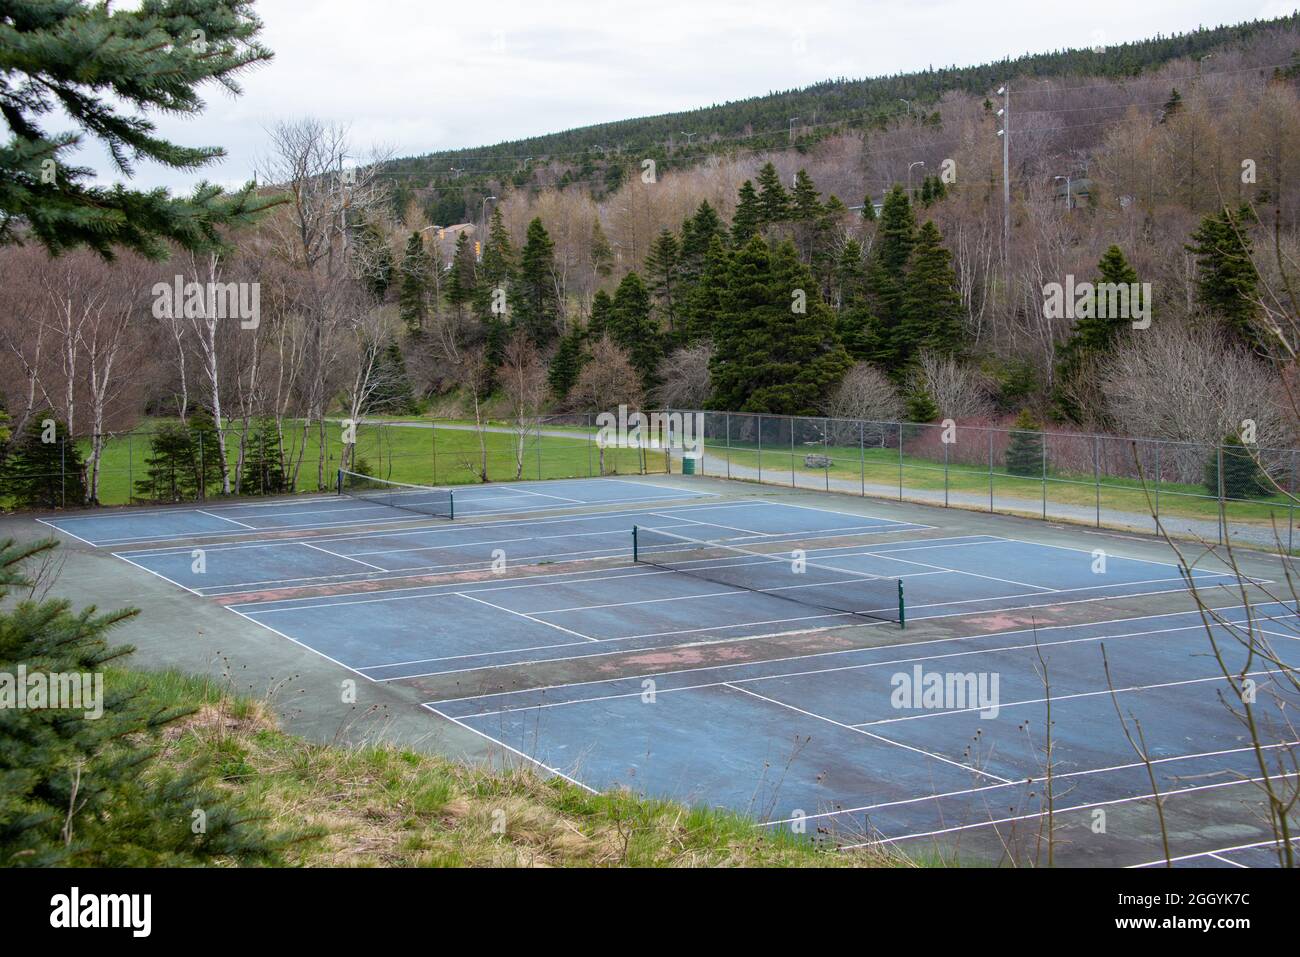 An outdoor tennis court with blue paint, white lines, and a black mesh tennis net. The edge of the court has white lines. Stock Photo